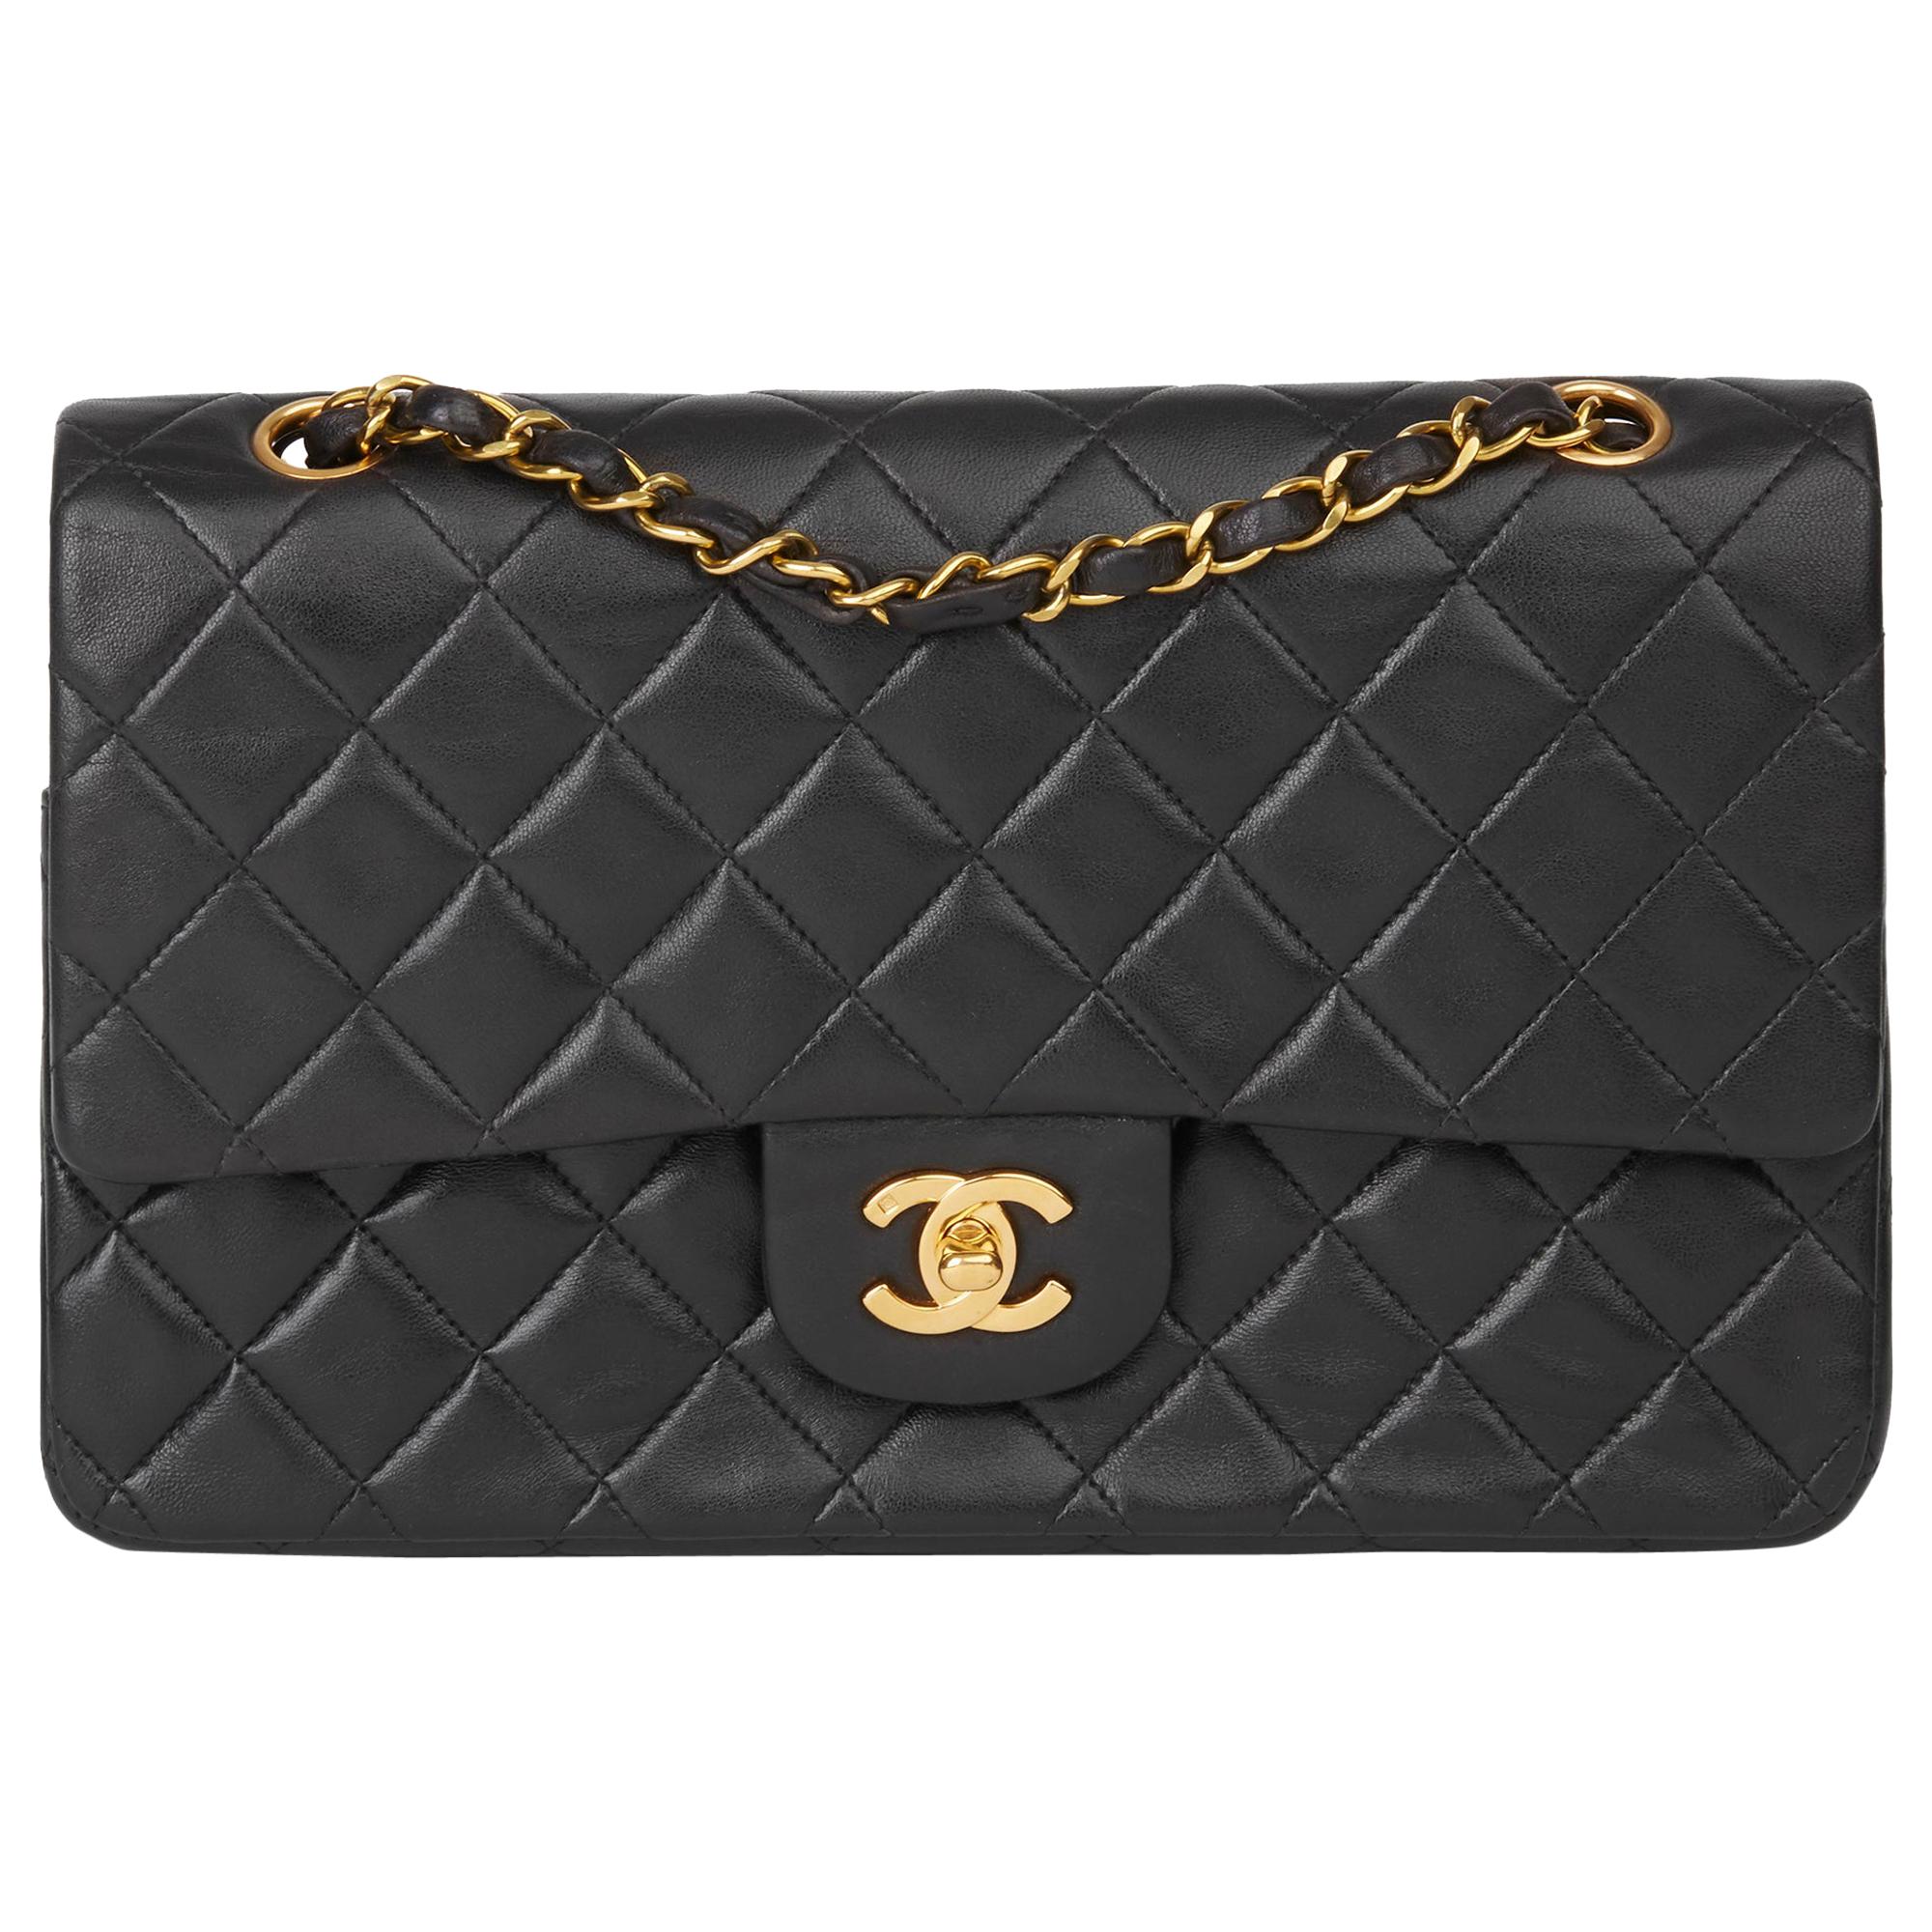 1994 Chanel Black Quilted Lambskin Medium Classic Double Flap Bag 